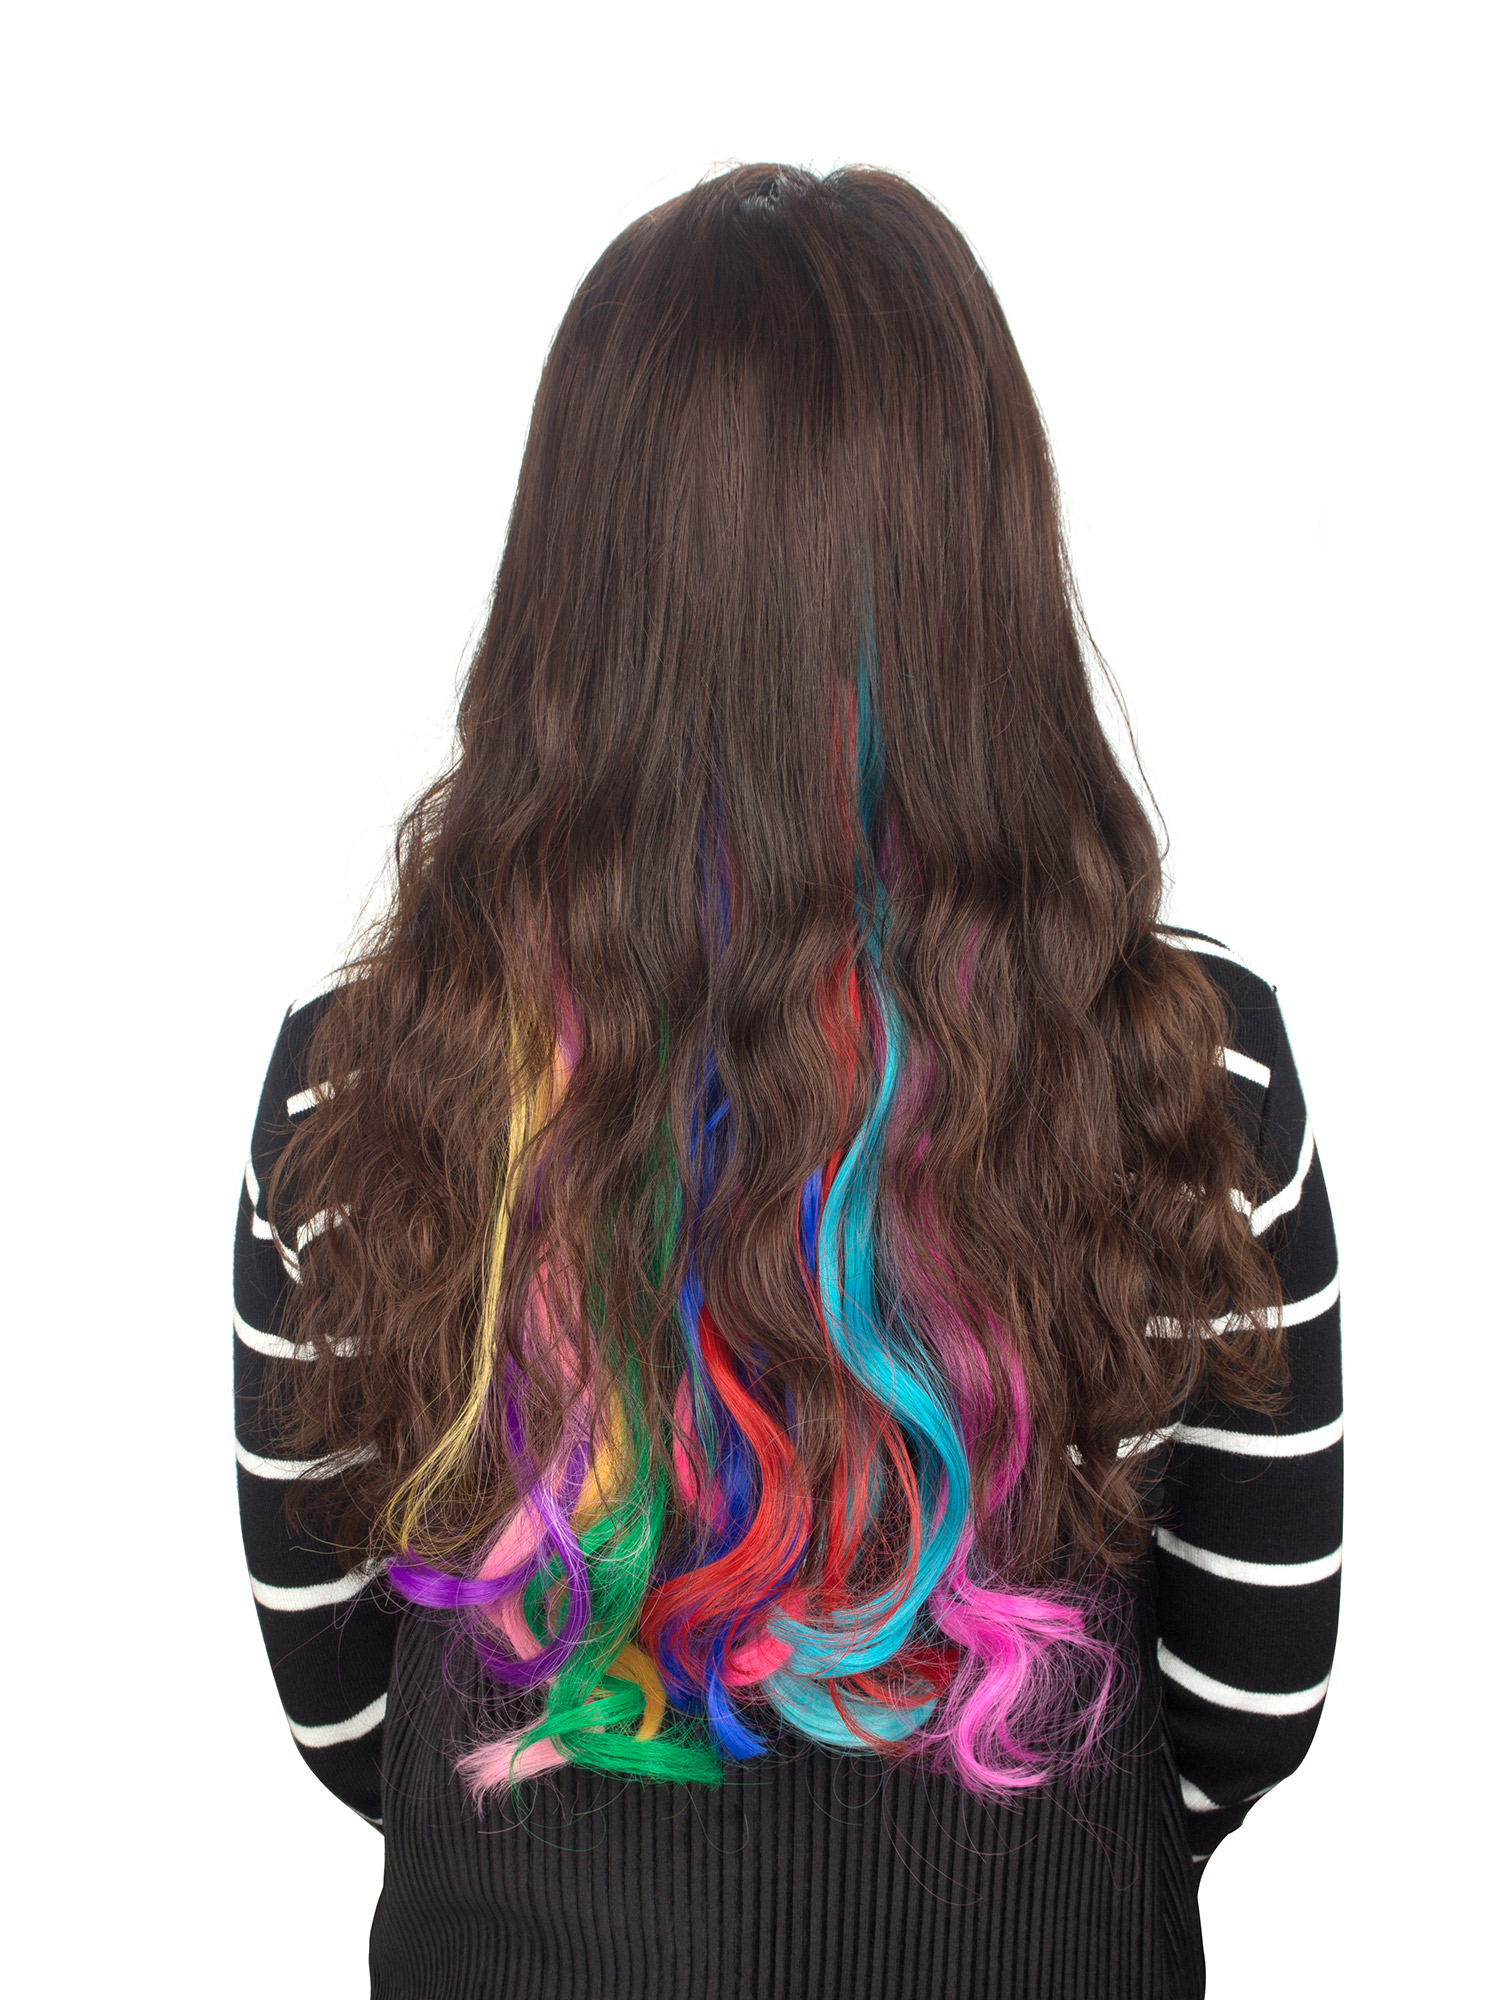 LELINTA Clip In On Colorful Hair piece Synthetic Curly Silk Soft Hair Extensions Highlight - image 5 of 5